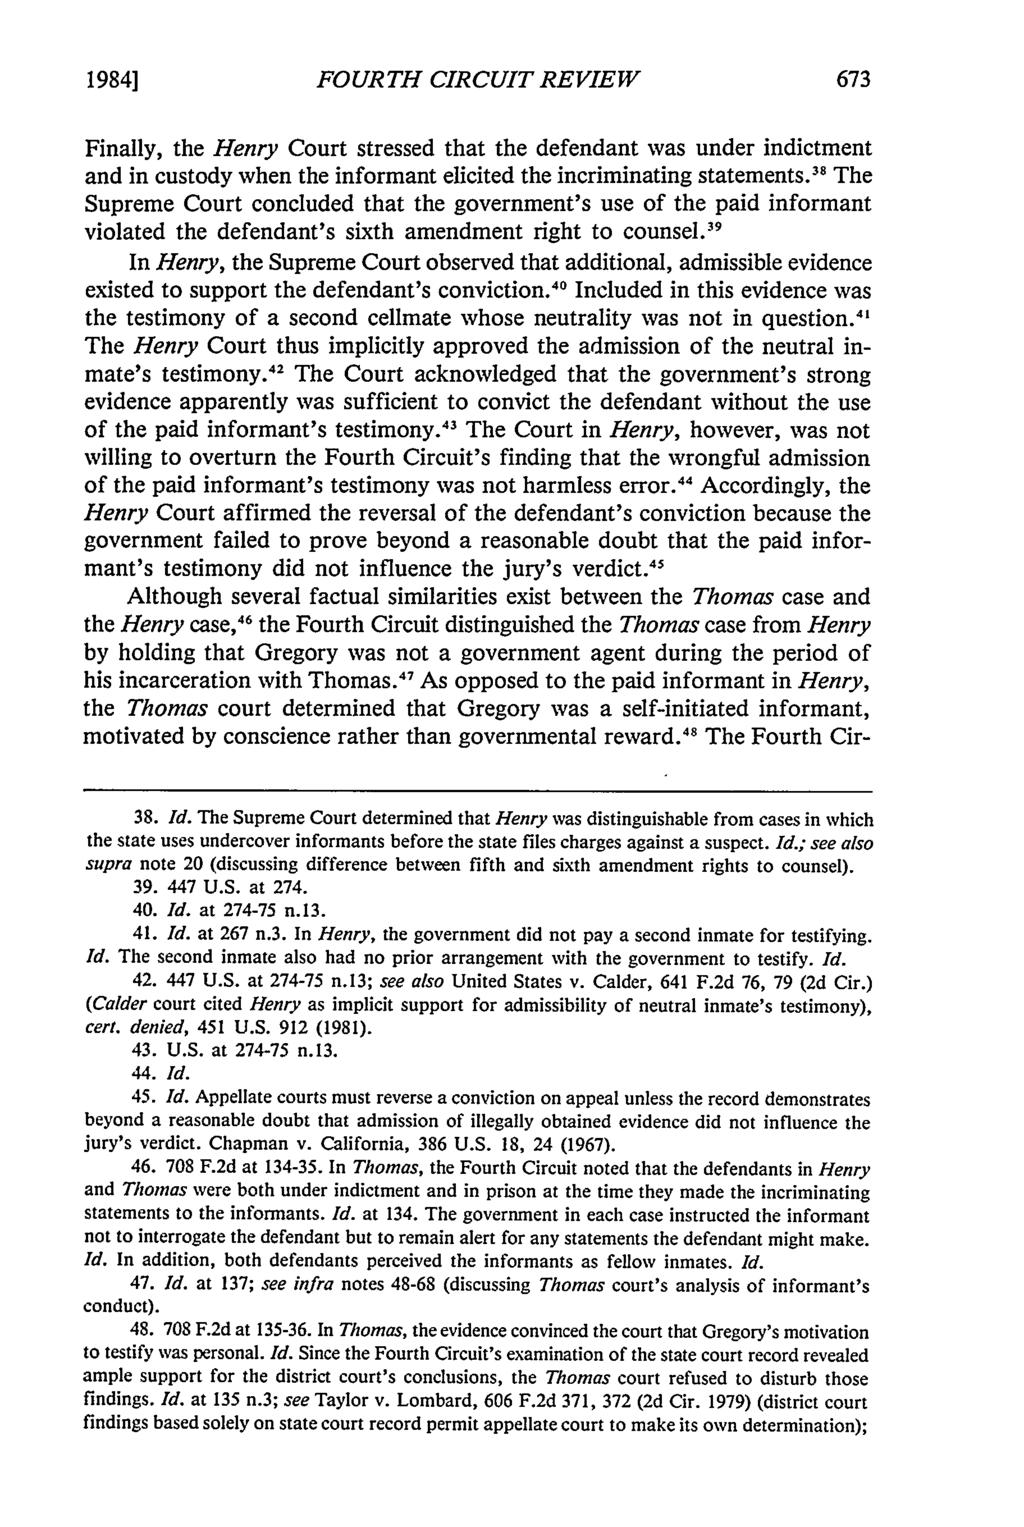 19841 FOURTH CIRCUIT REVIEW Finally, the Henry Court stressed that the defendant was under indictment and in custody when the informant elicited the incriminating statements.